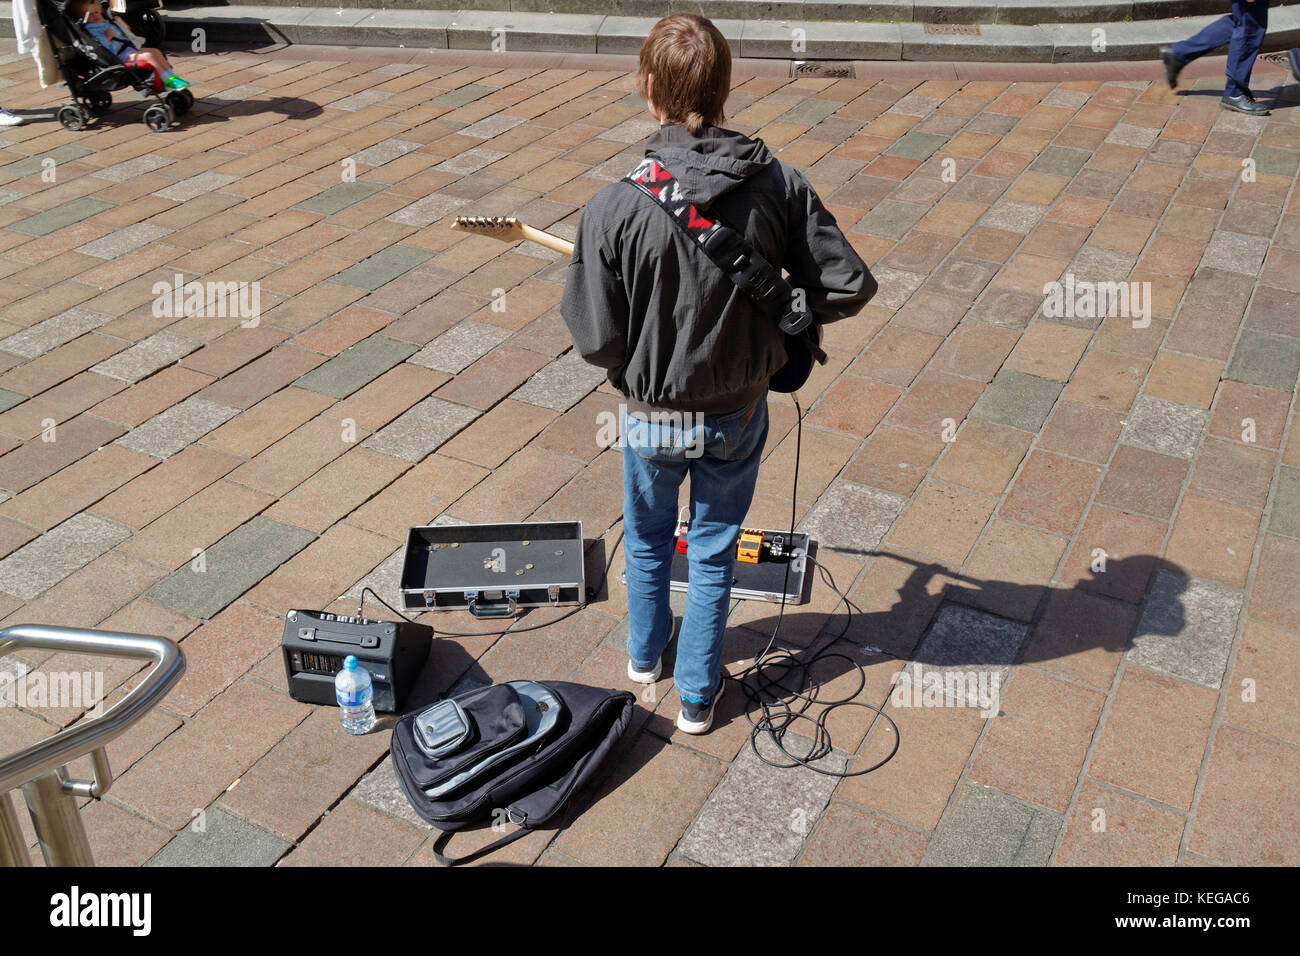 Glasgow music busker on street sidewalk placement   with guitar case shadow on a sunny day viewed from behind Stock Photo